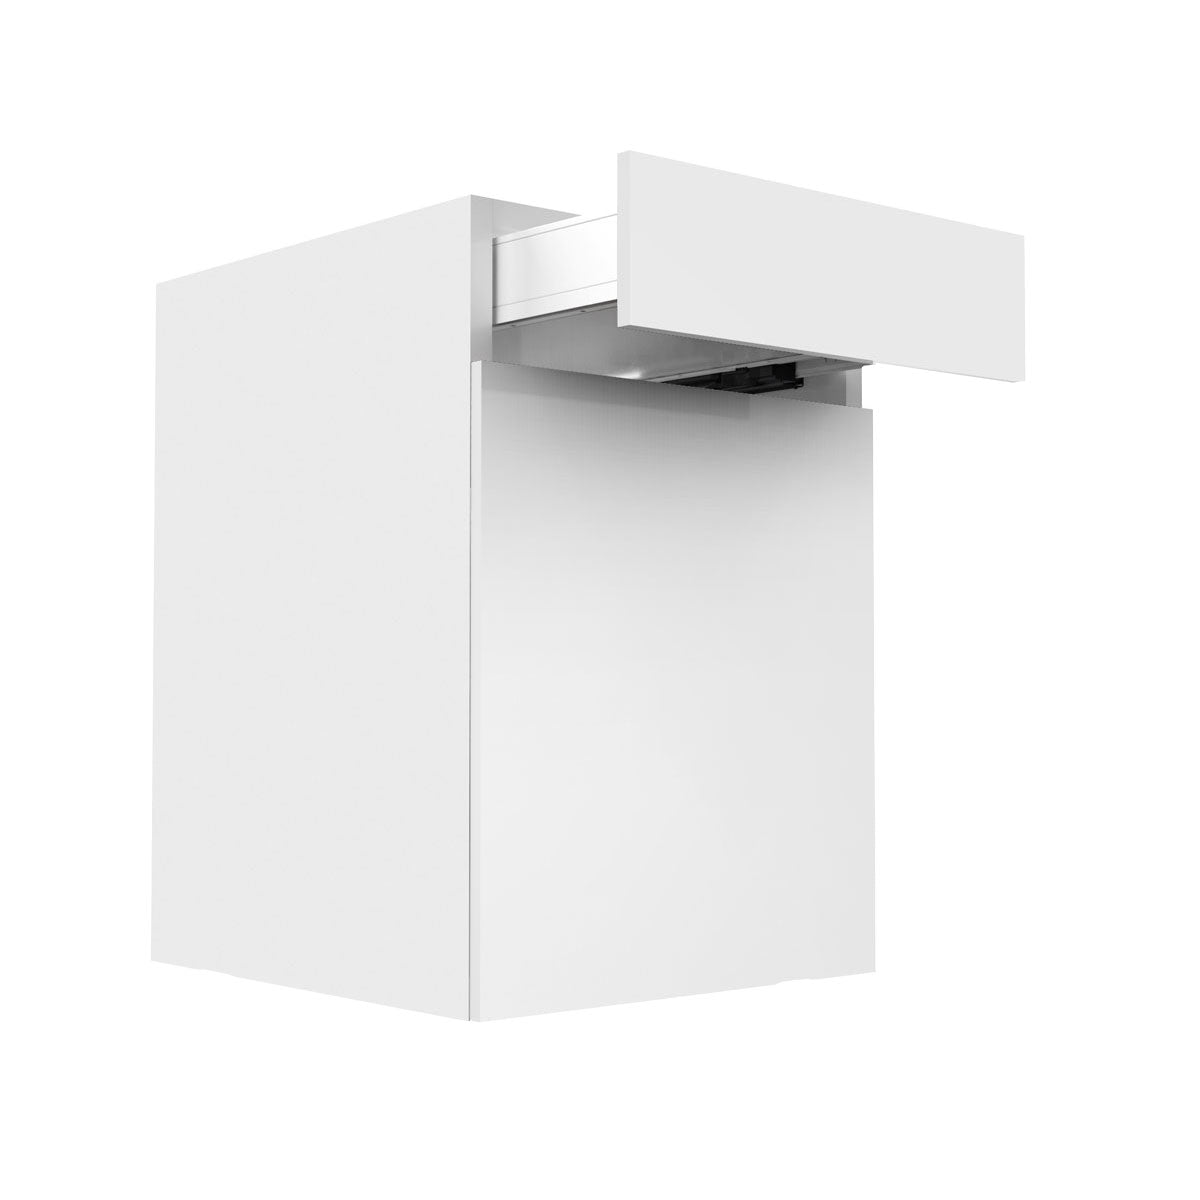 RTA - Glossy White - Single Door Base Cabinets | 21"W x 30"H x 23.8"D